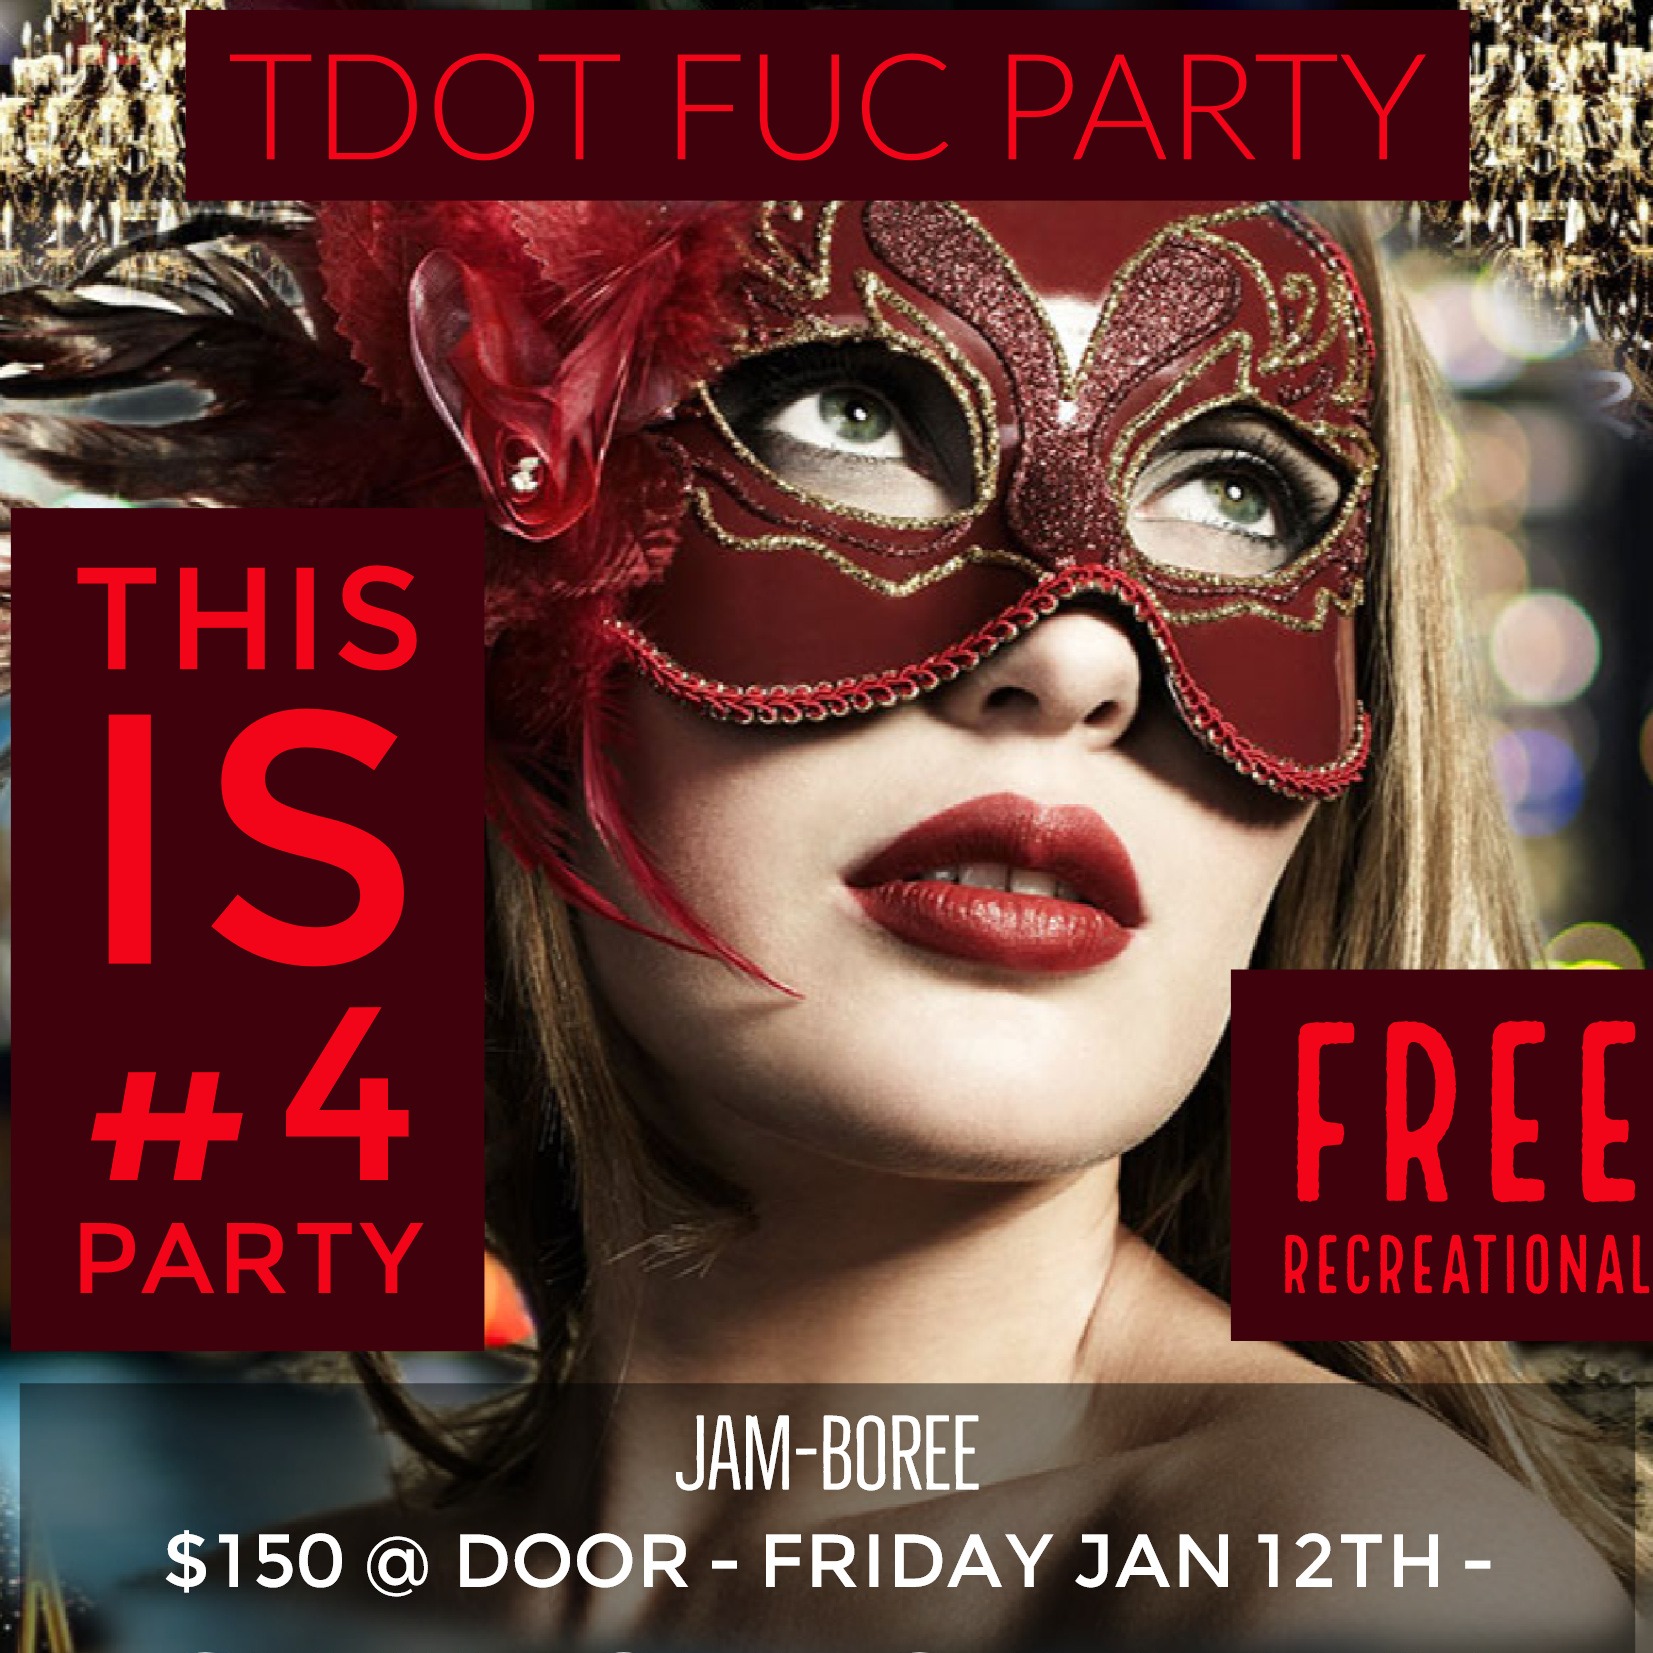 TDOTFPARTY PRESENTS: THIS IS #4 SWINGERS PARTY (THEME) 647-794-4272